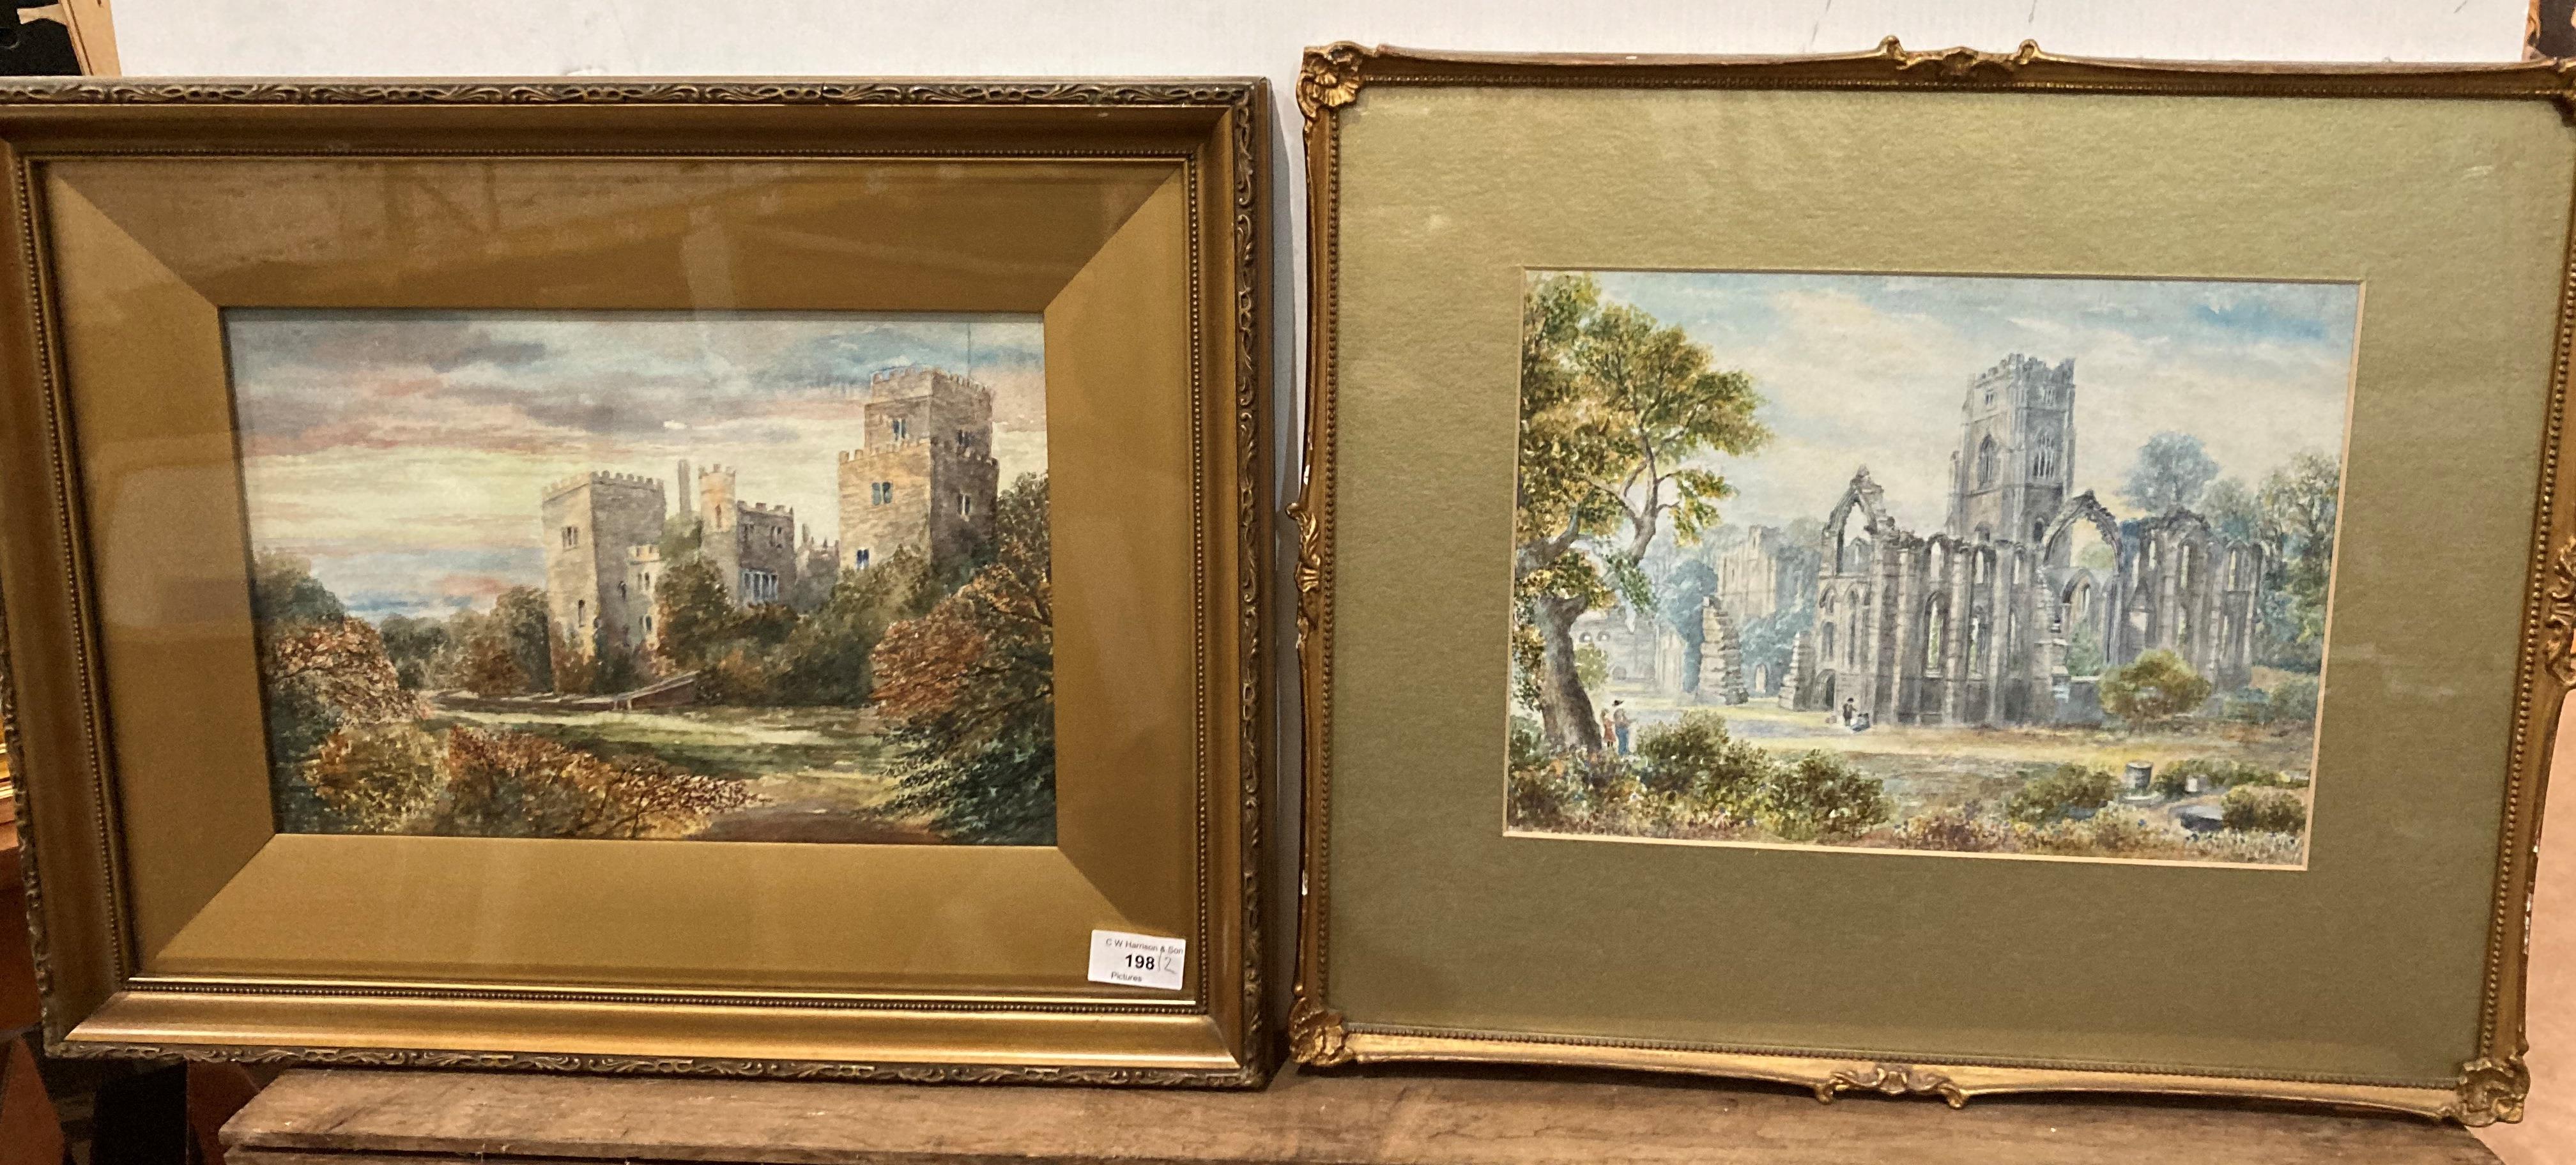 Two unsigned gilt framed watercolours 'Ruined Abbey' 23cm x 30cm and 'Small Castle' 24cm x 32cm